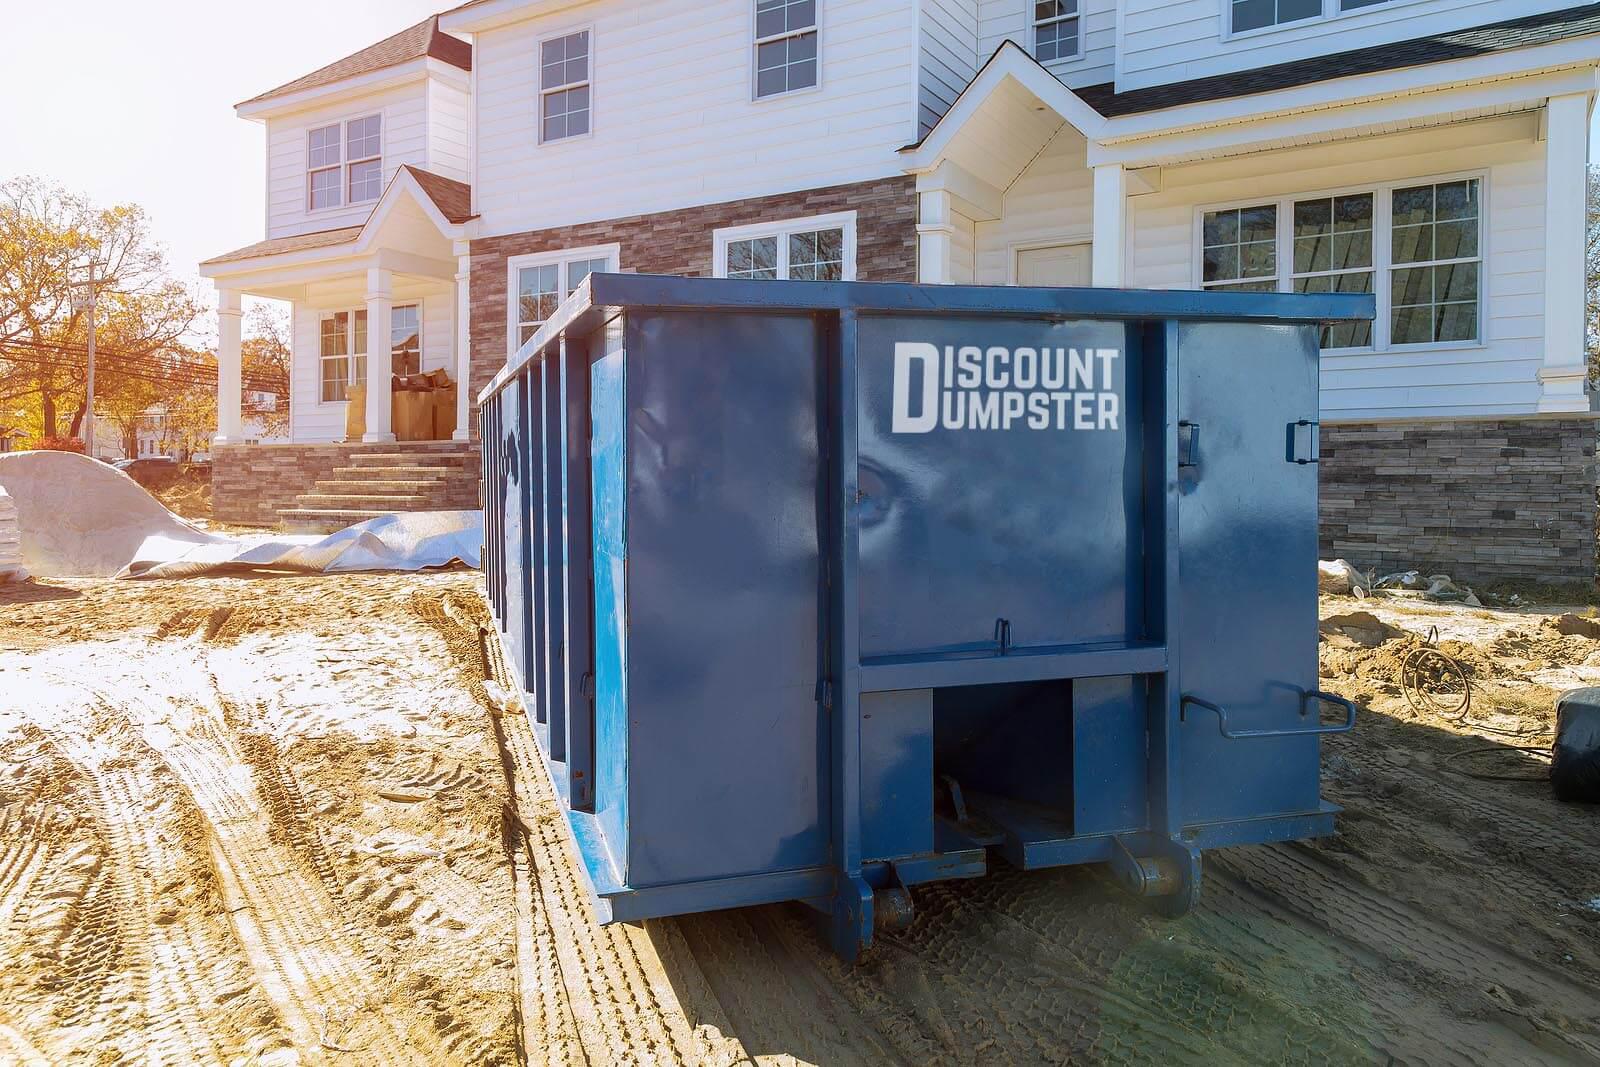 Discount dumpster is proud to partner with you for your next home improvement in chicago il